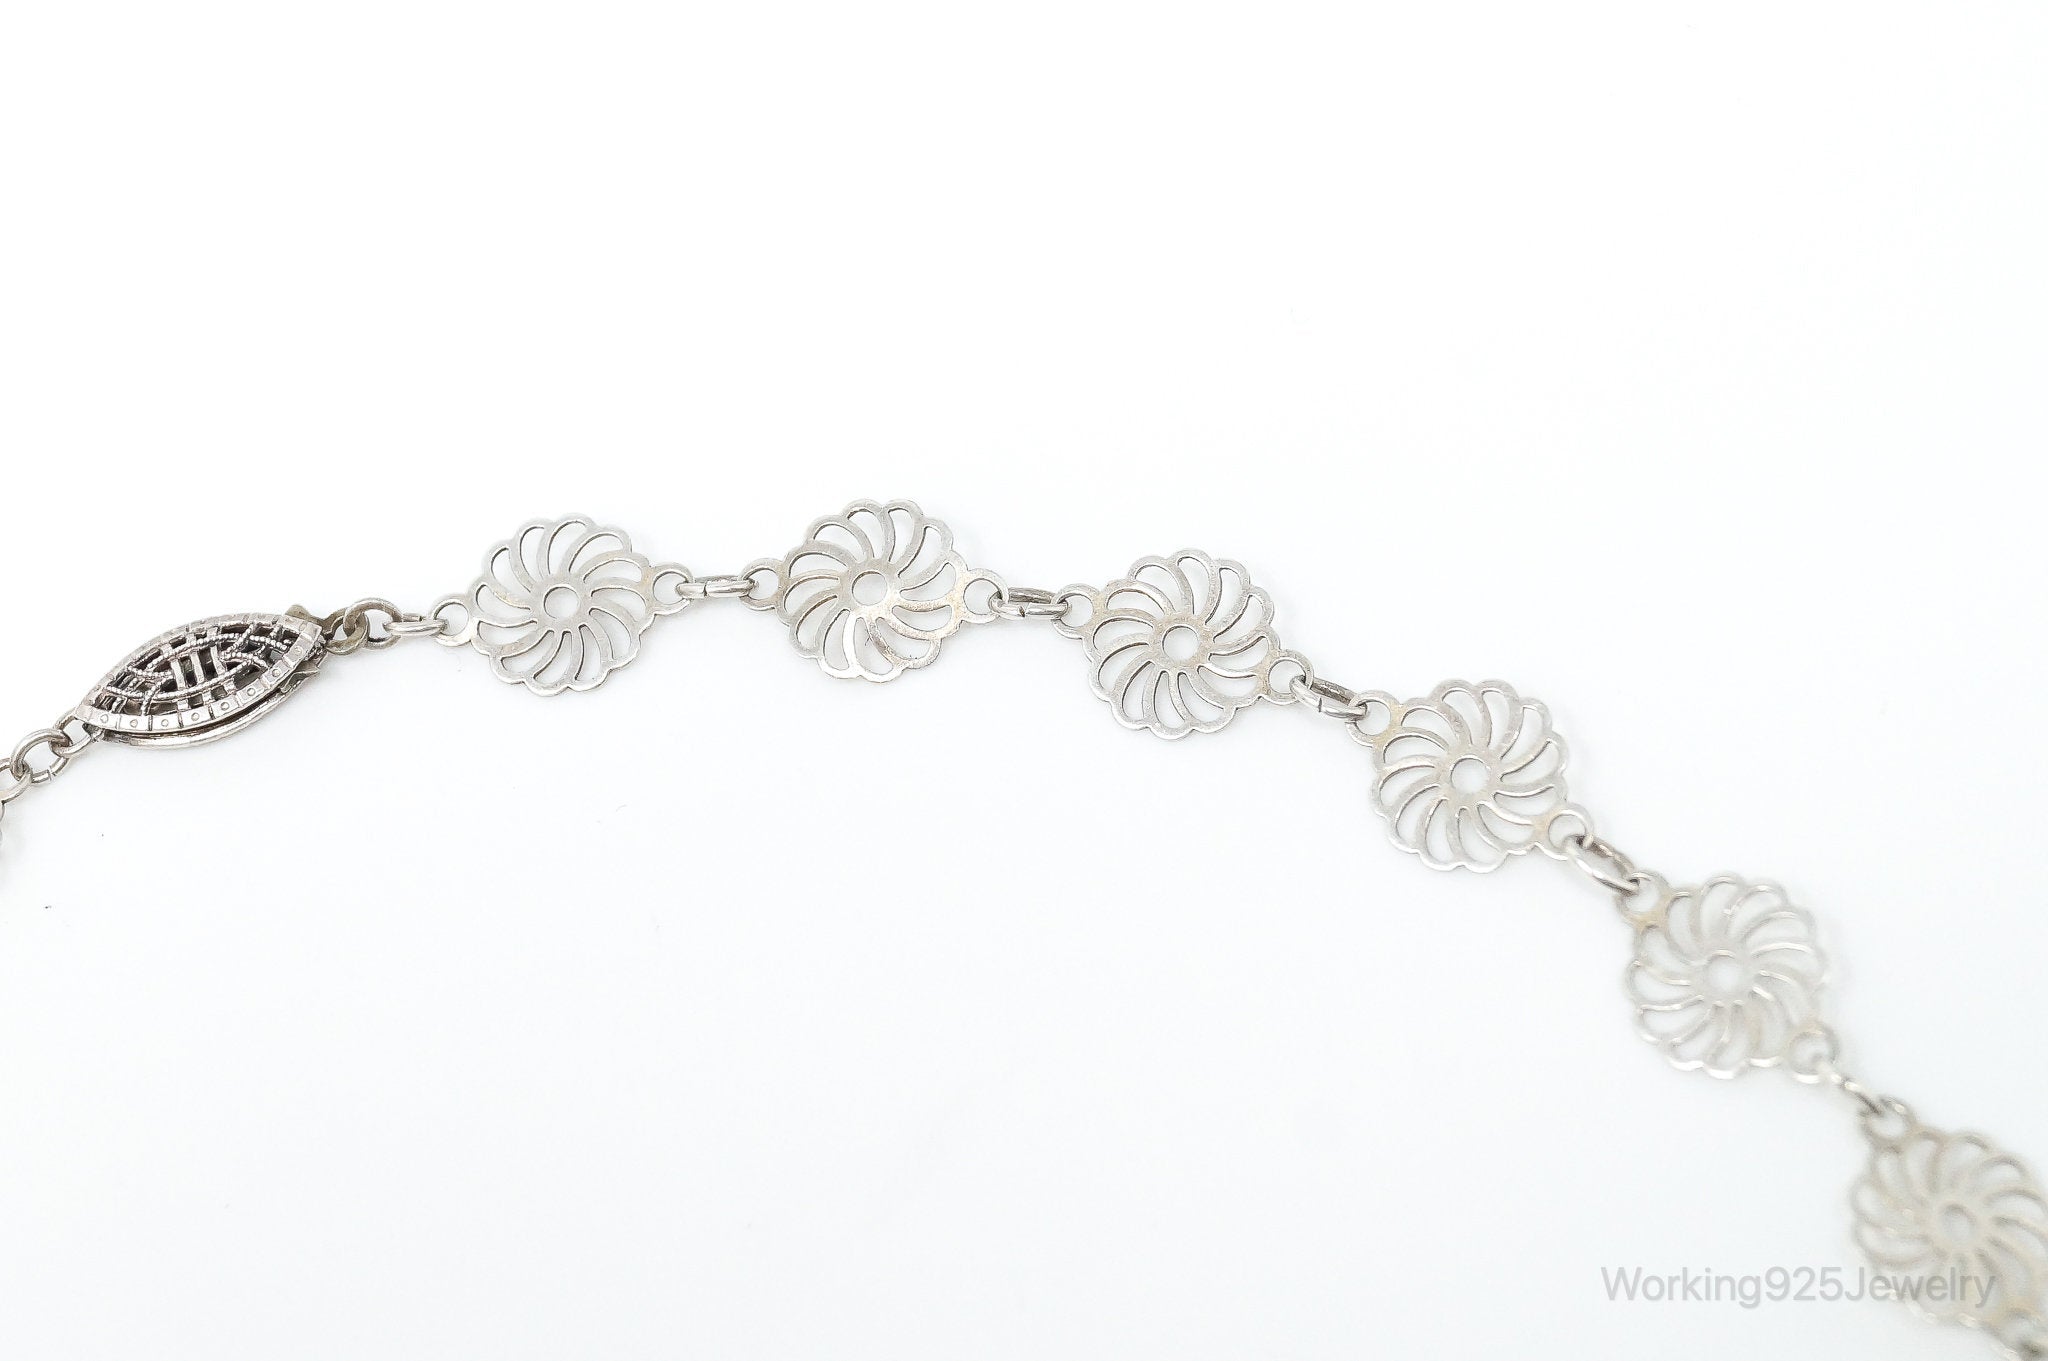 Antique Flowers Pattern Sterling Silver Necklace